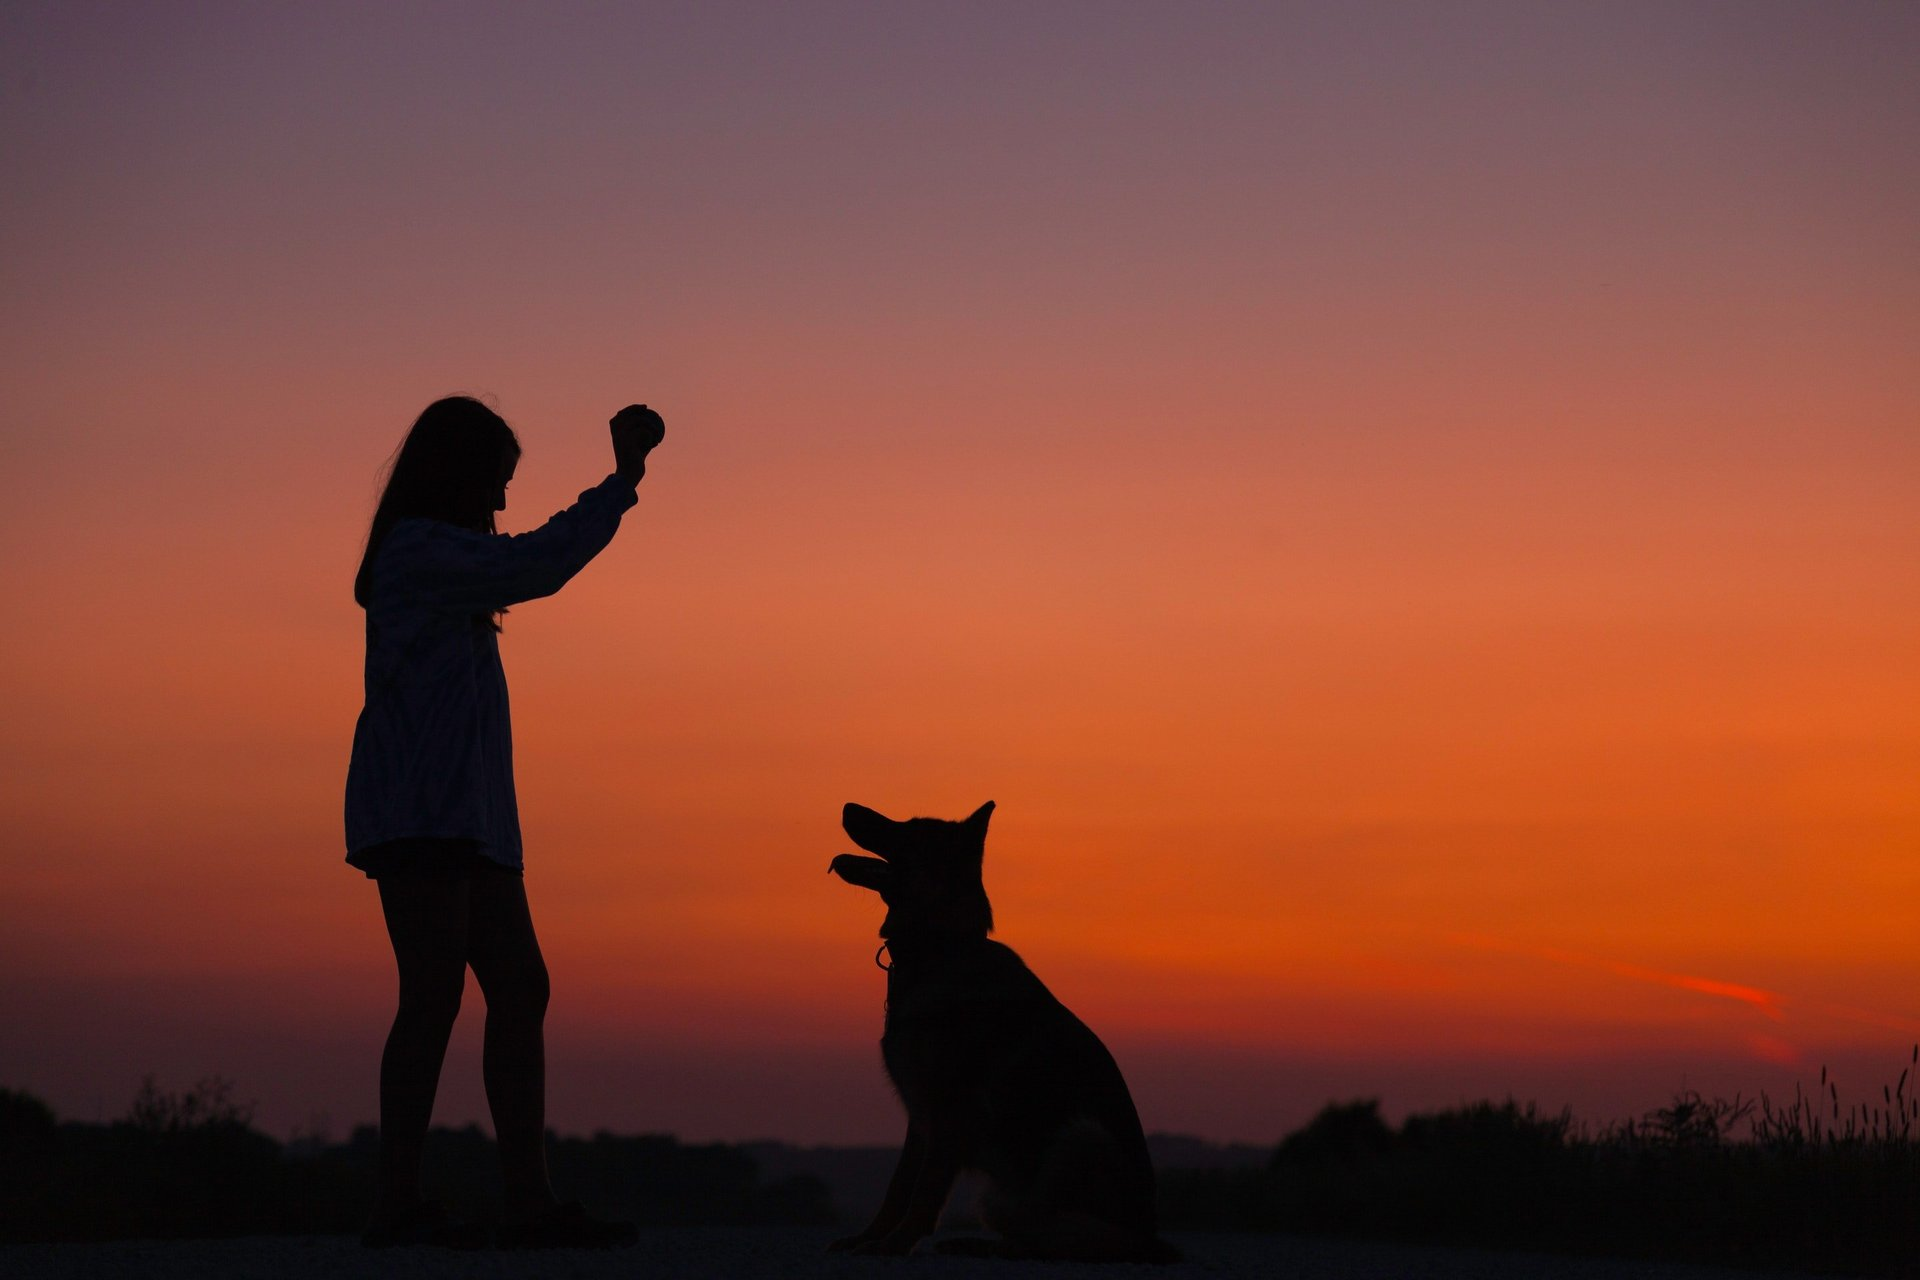 The siluette of a girl holding up a ball in front of her sitting dog against a purple and red sunset